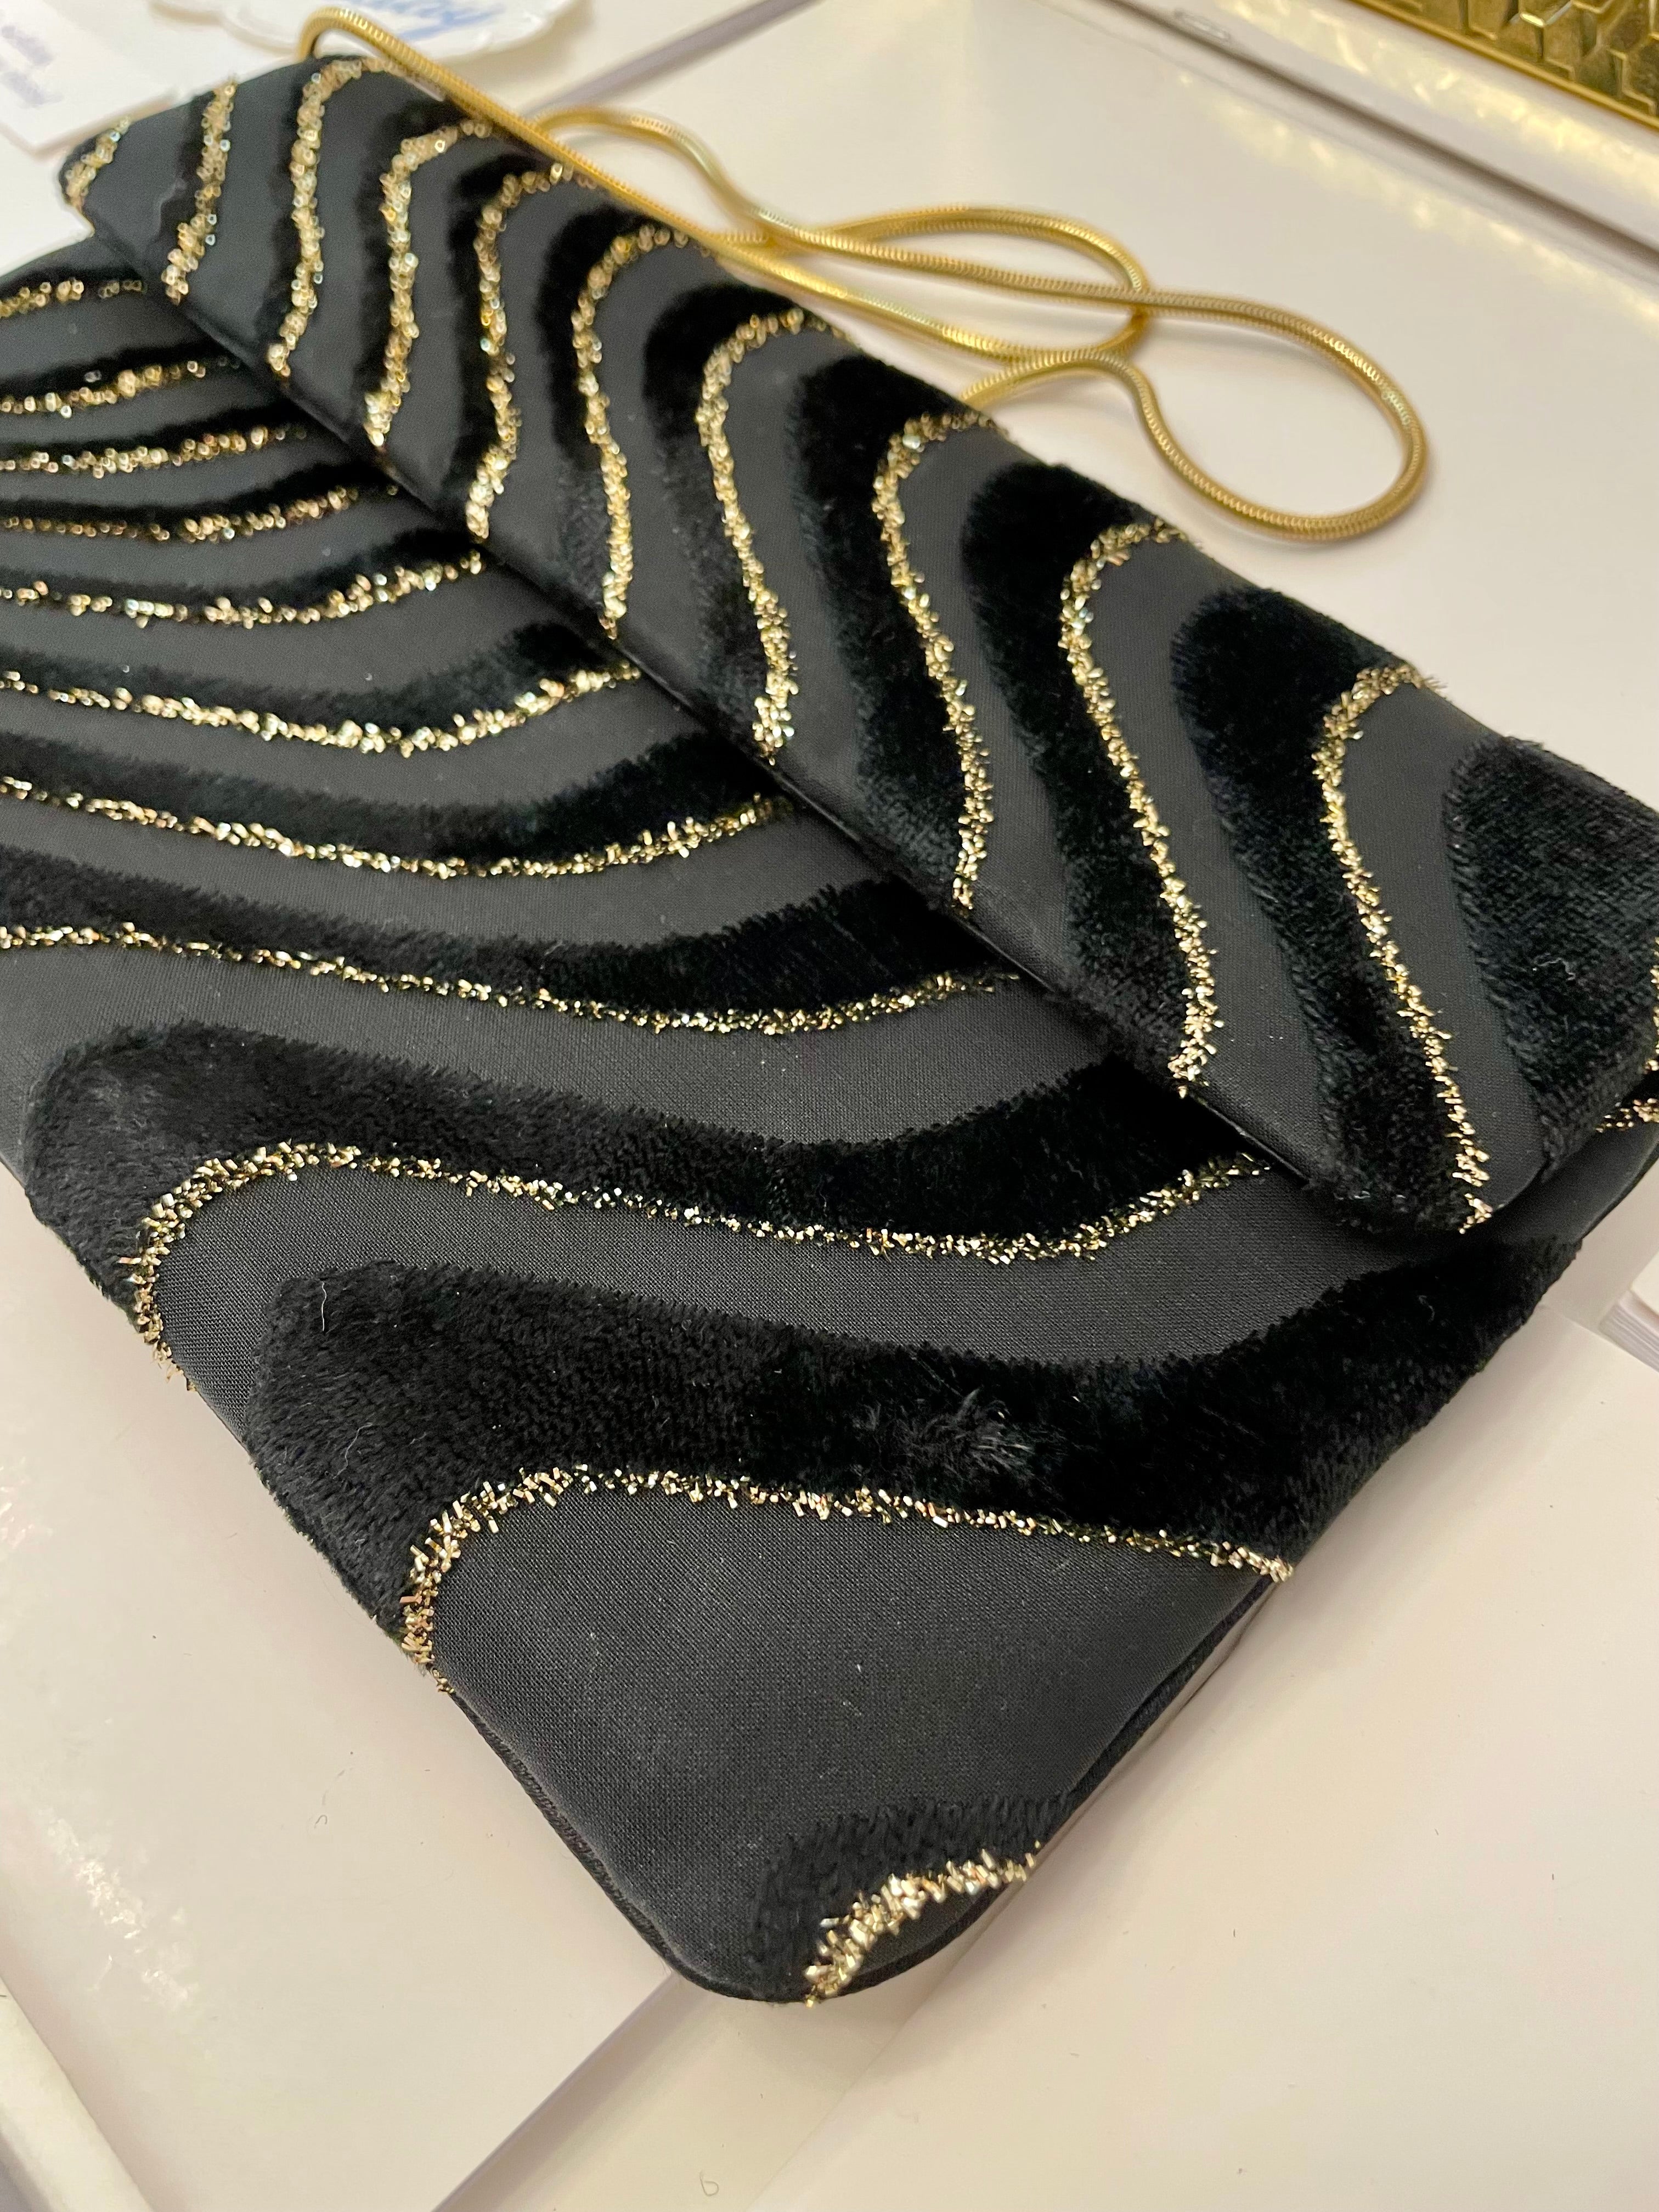 1970's dinner party noir and gold lame clutch bag.... so sassy